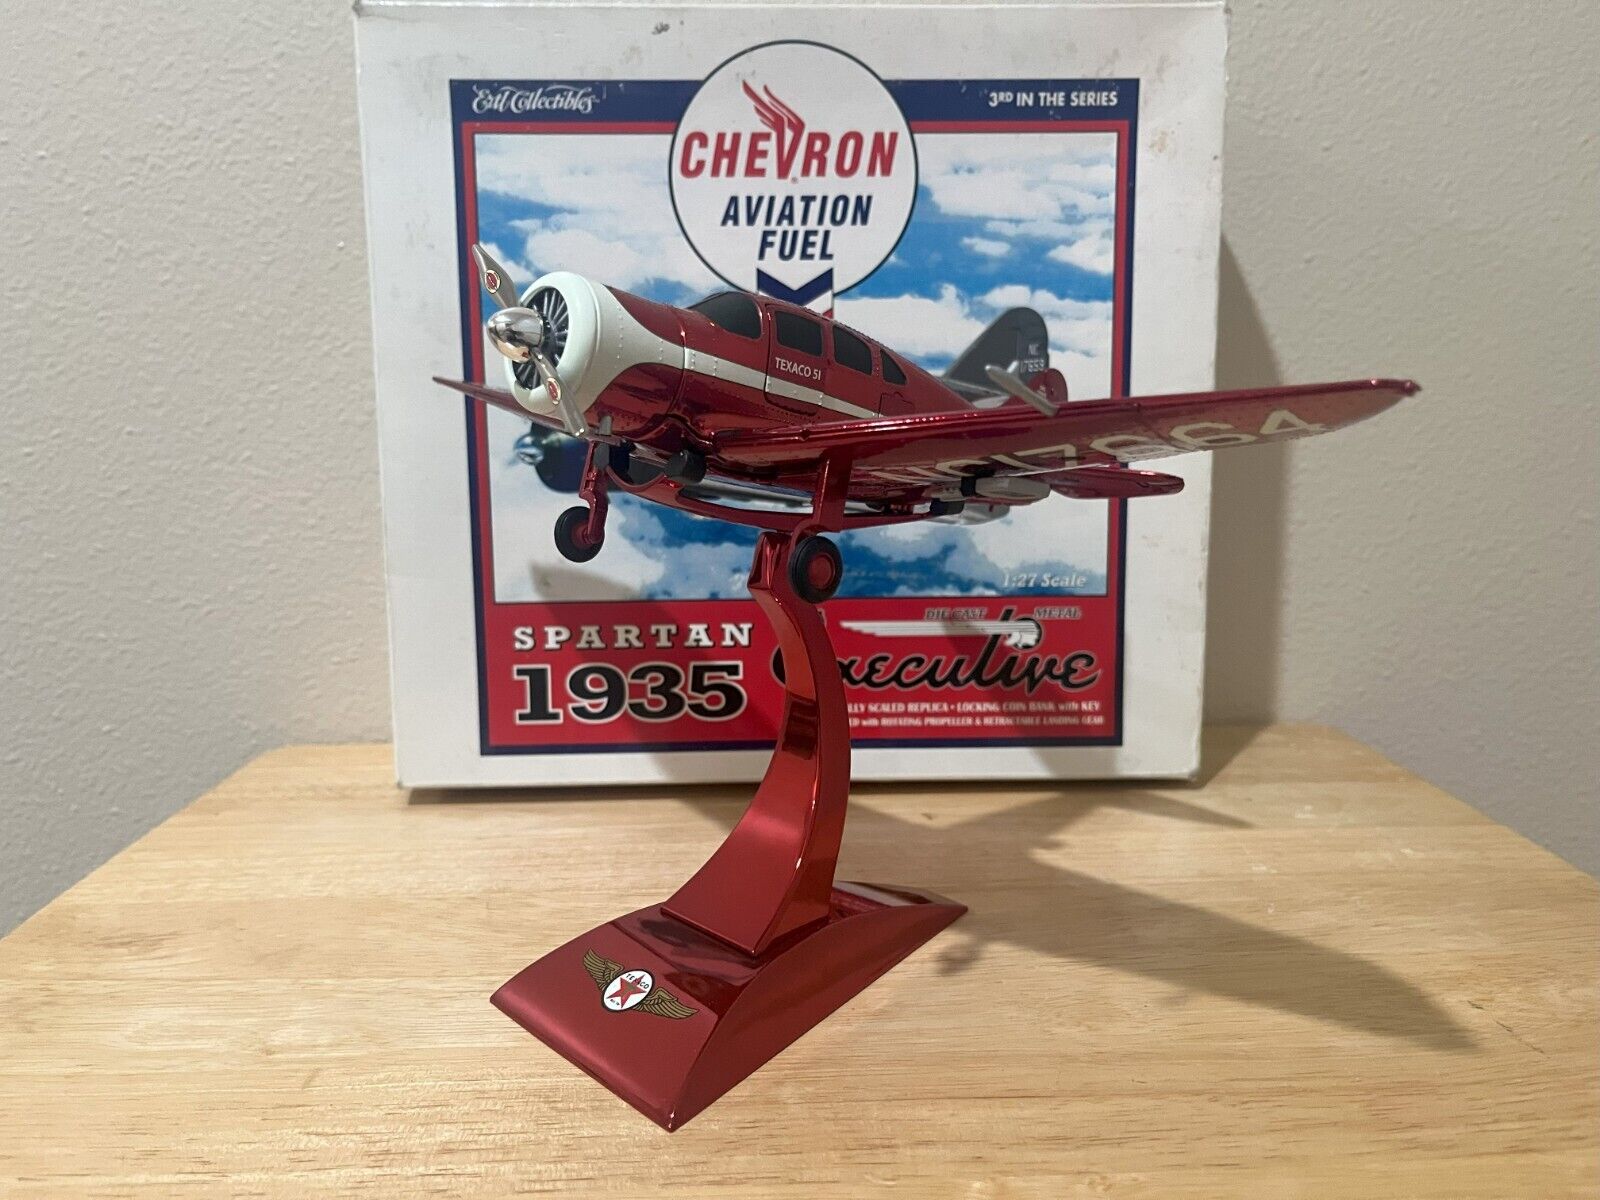 Wings Of Texaco 1935 Spartan Executive Airplane 3rd Edition Die-Cast